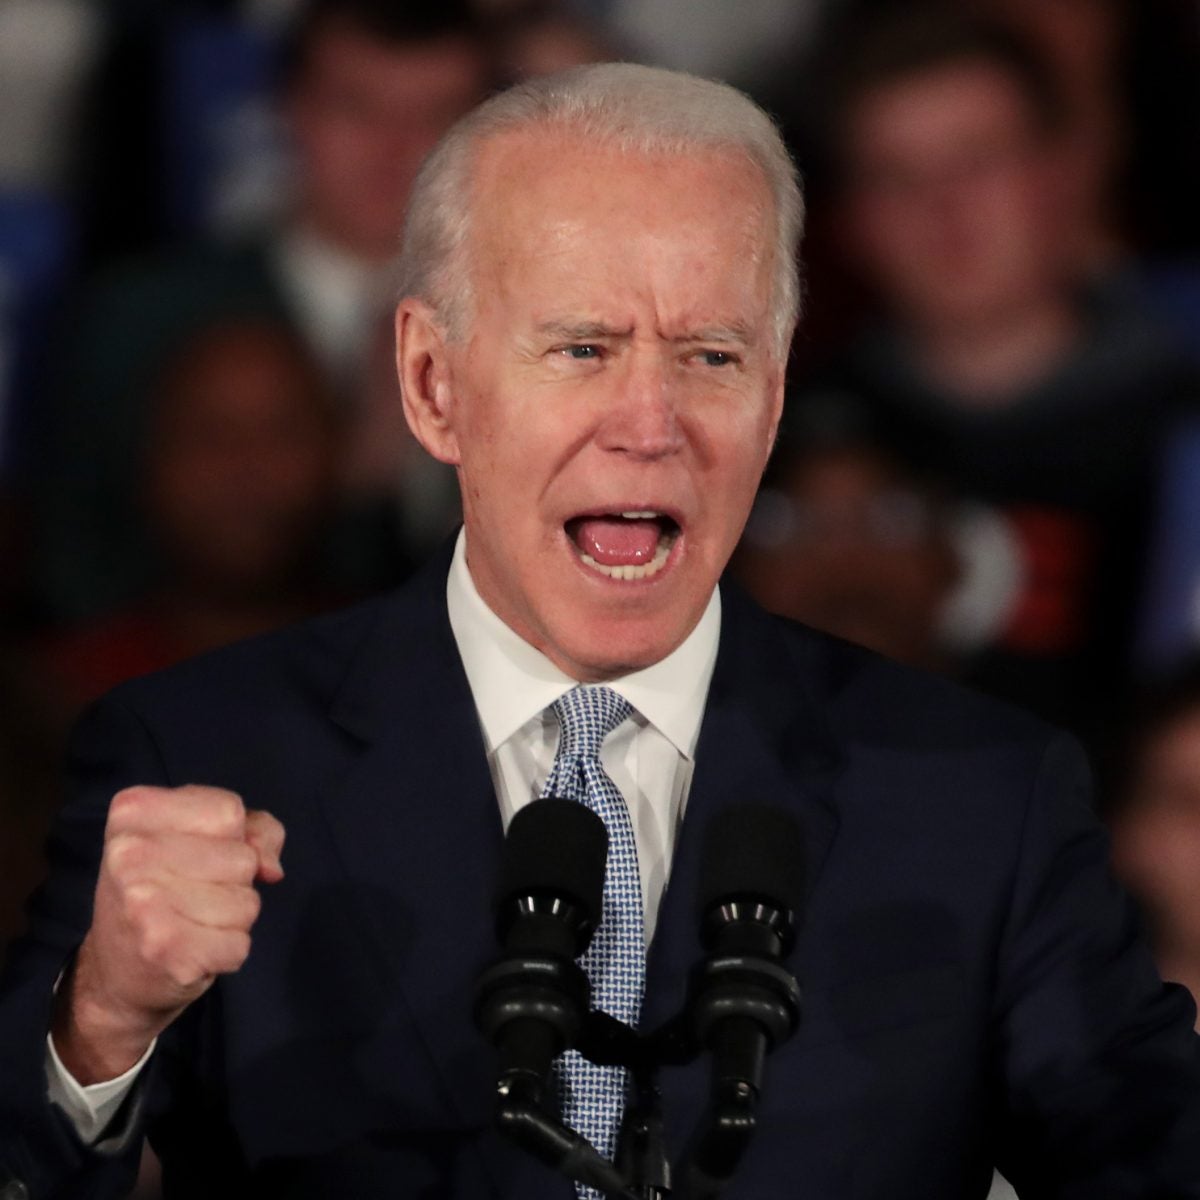 Joe Biden Won The South Carolina Primary, But Super Tuesday Could Be A Challenge